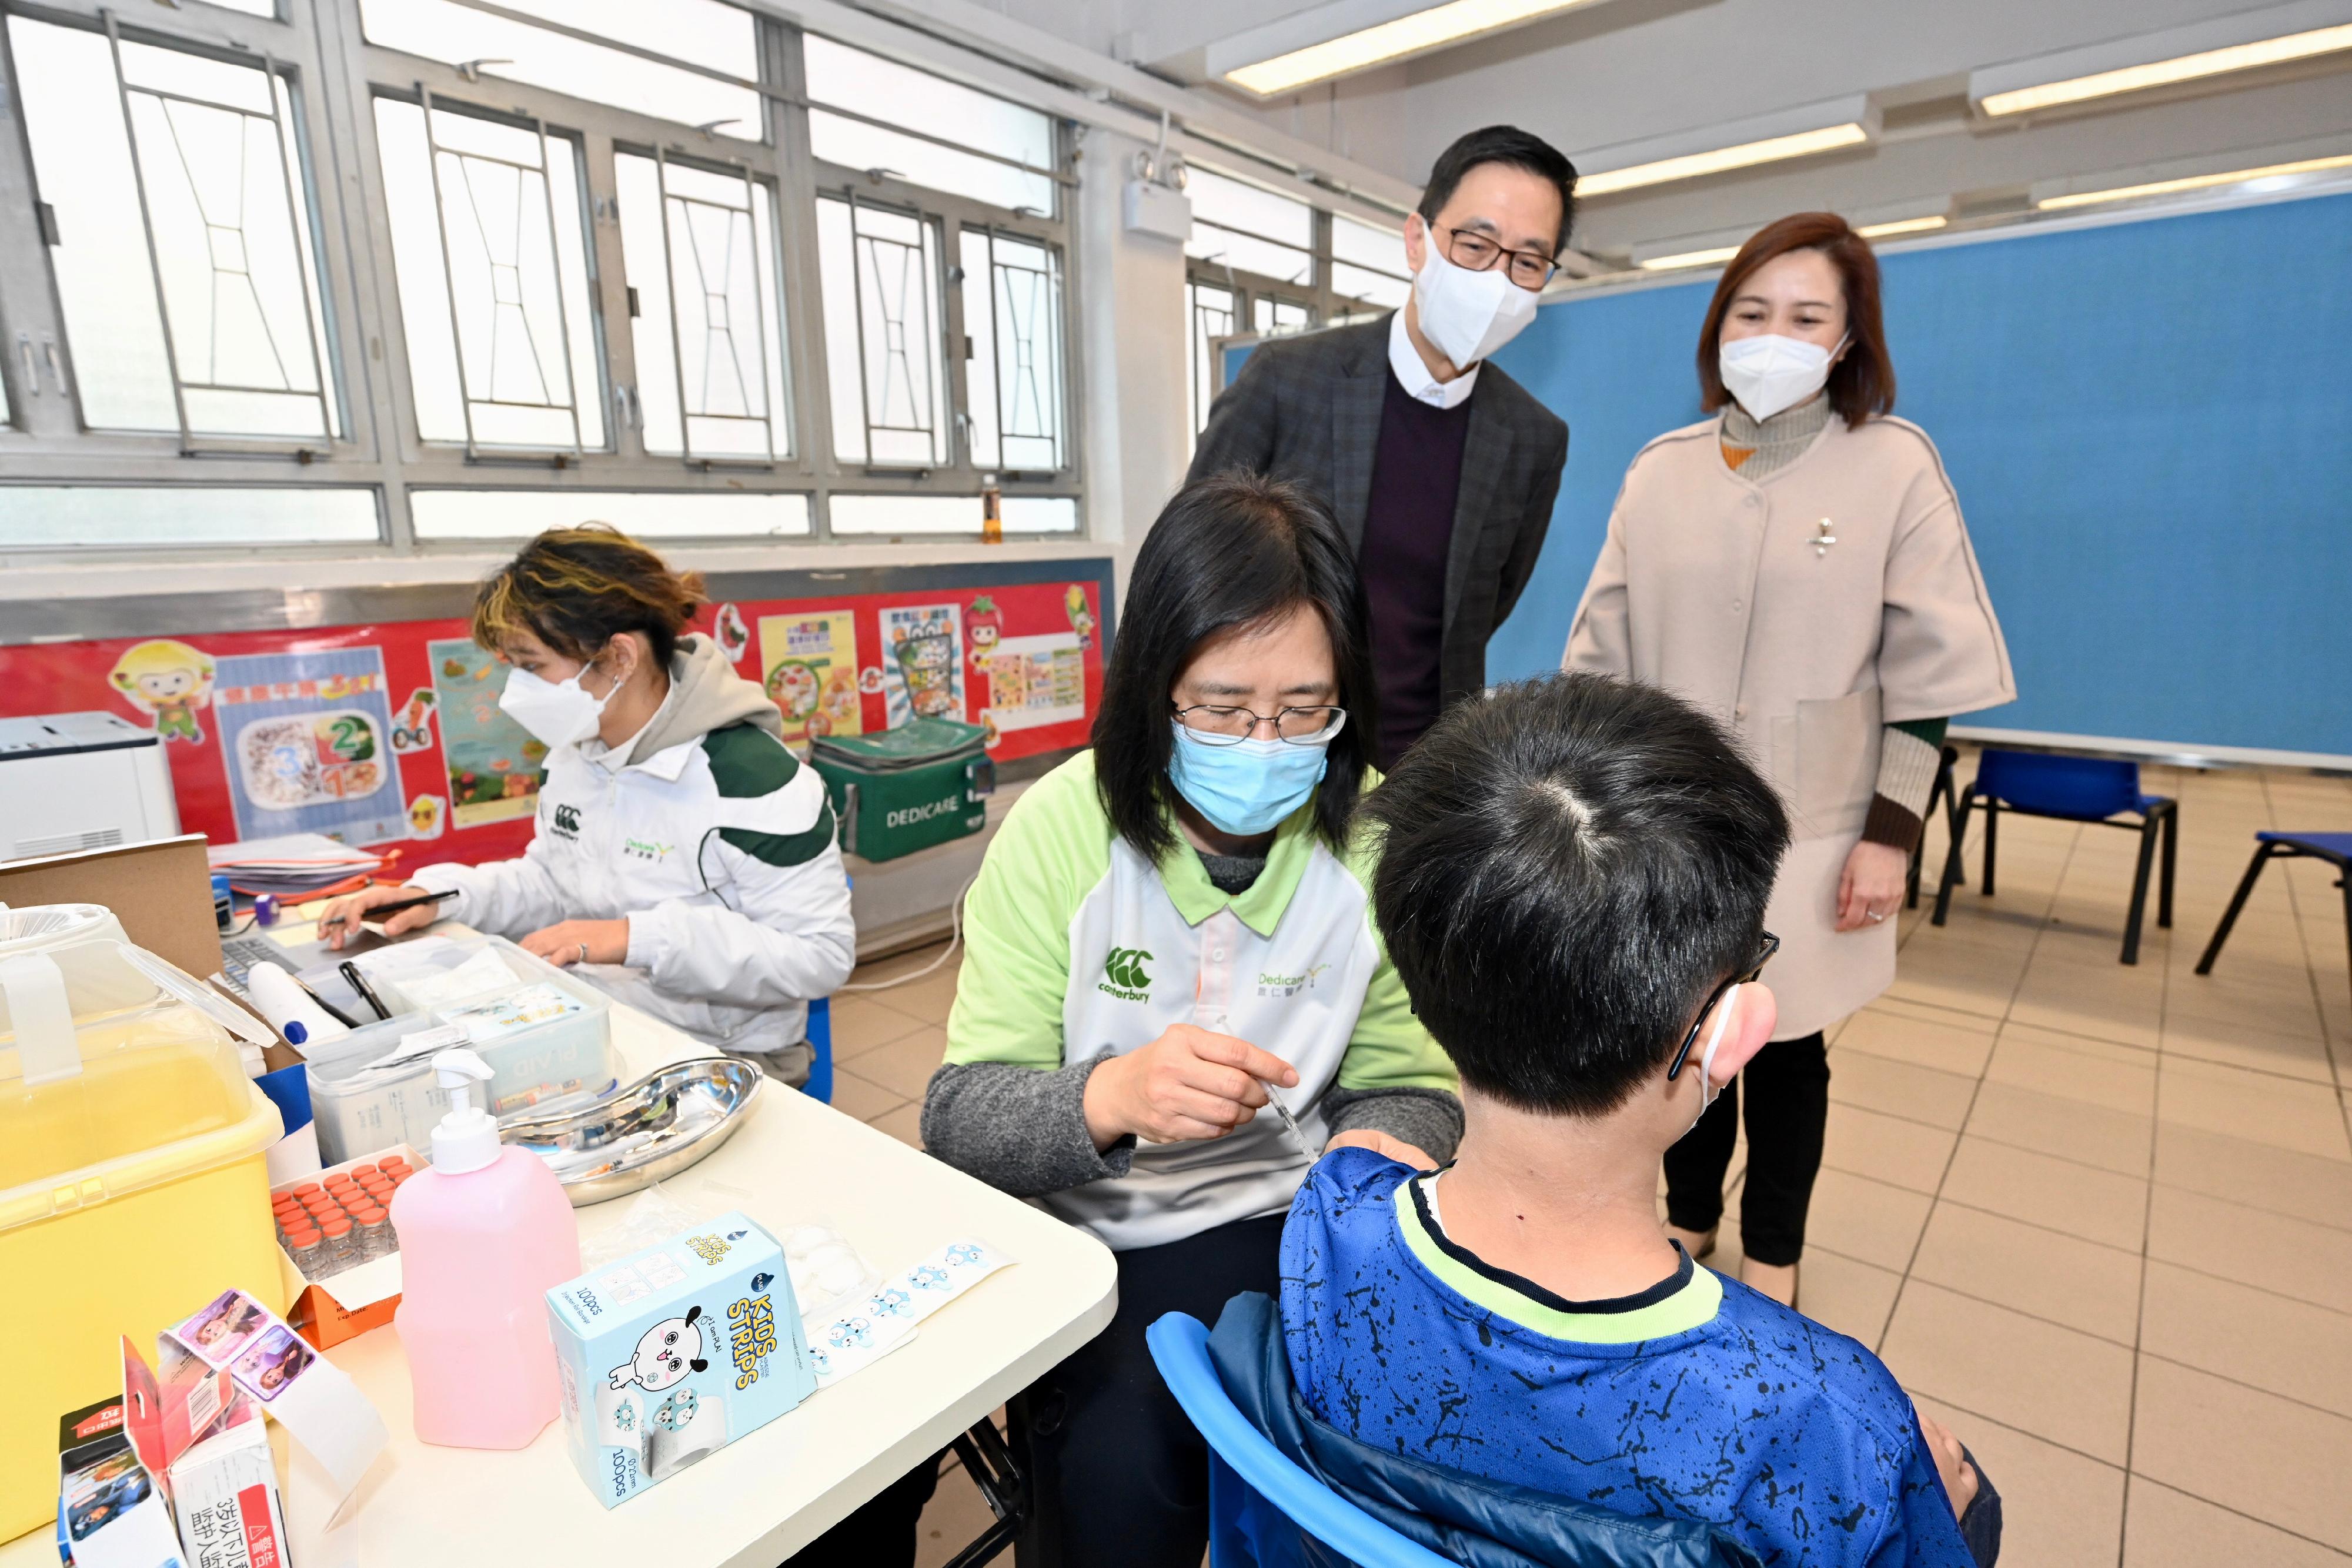 The Secretary for Education, Mr Kevin Yeung, visited Shau Kei Wan Government Primary School today (February 25) to inspect the implementation of the Vaccination Subsidy Scheme School Outreach. Photo shows Mr Yeung (back row, left), accompanied by the Headmistress, Ms Leung Ching-yee (back row, right), observing a student receiving his COVID-19 vaccination.